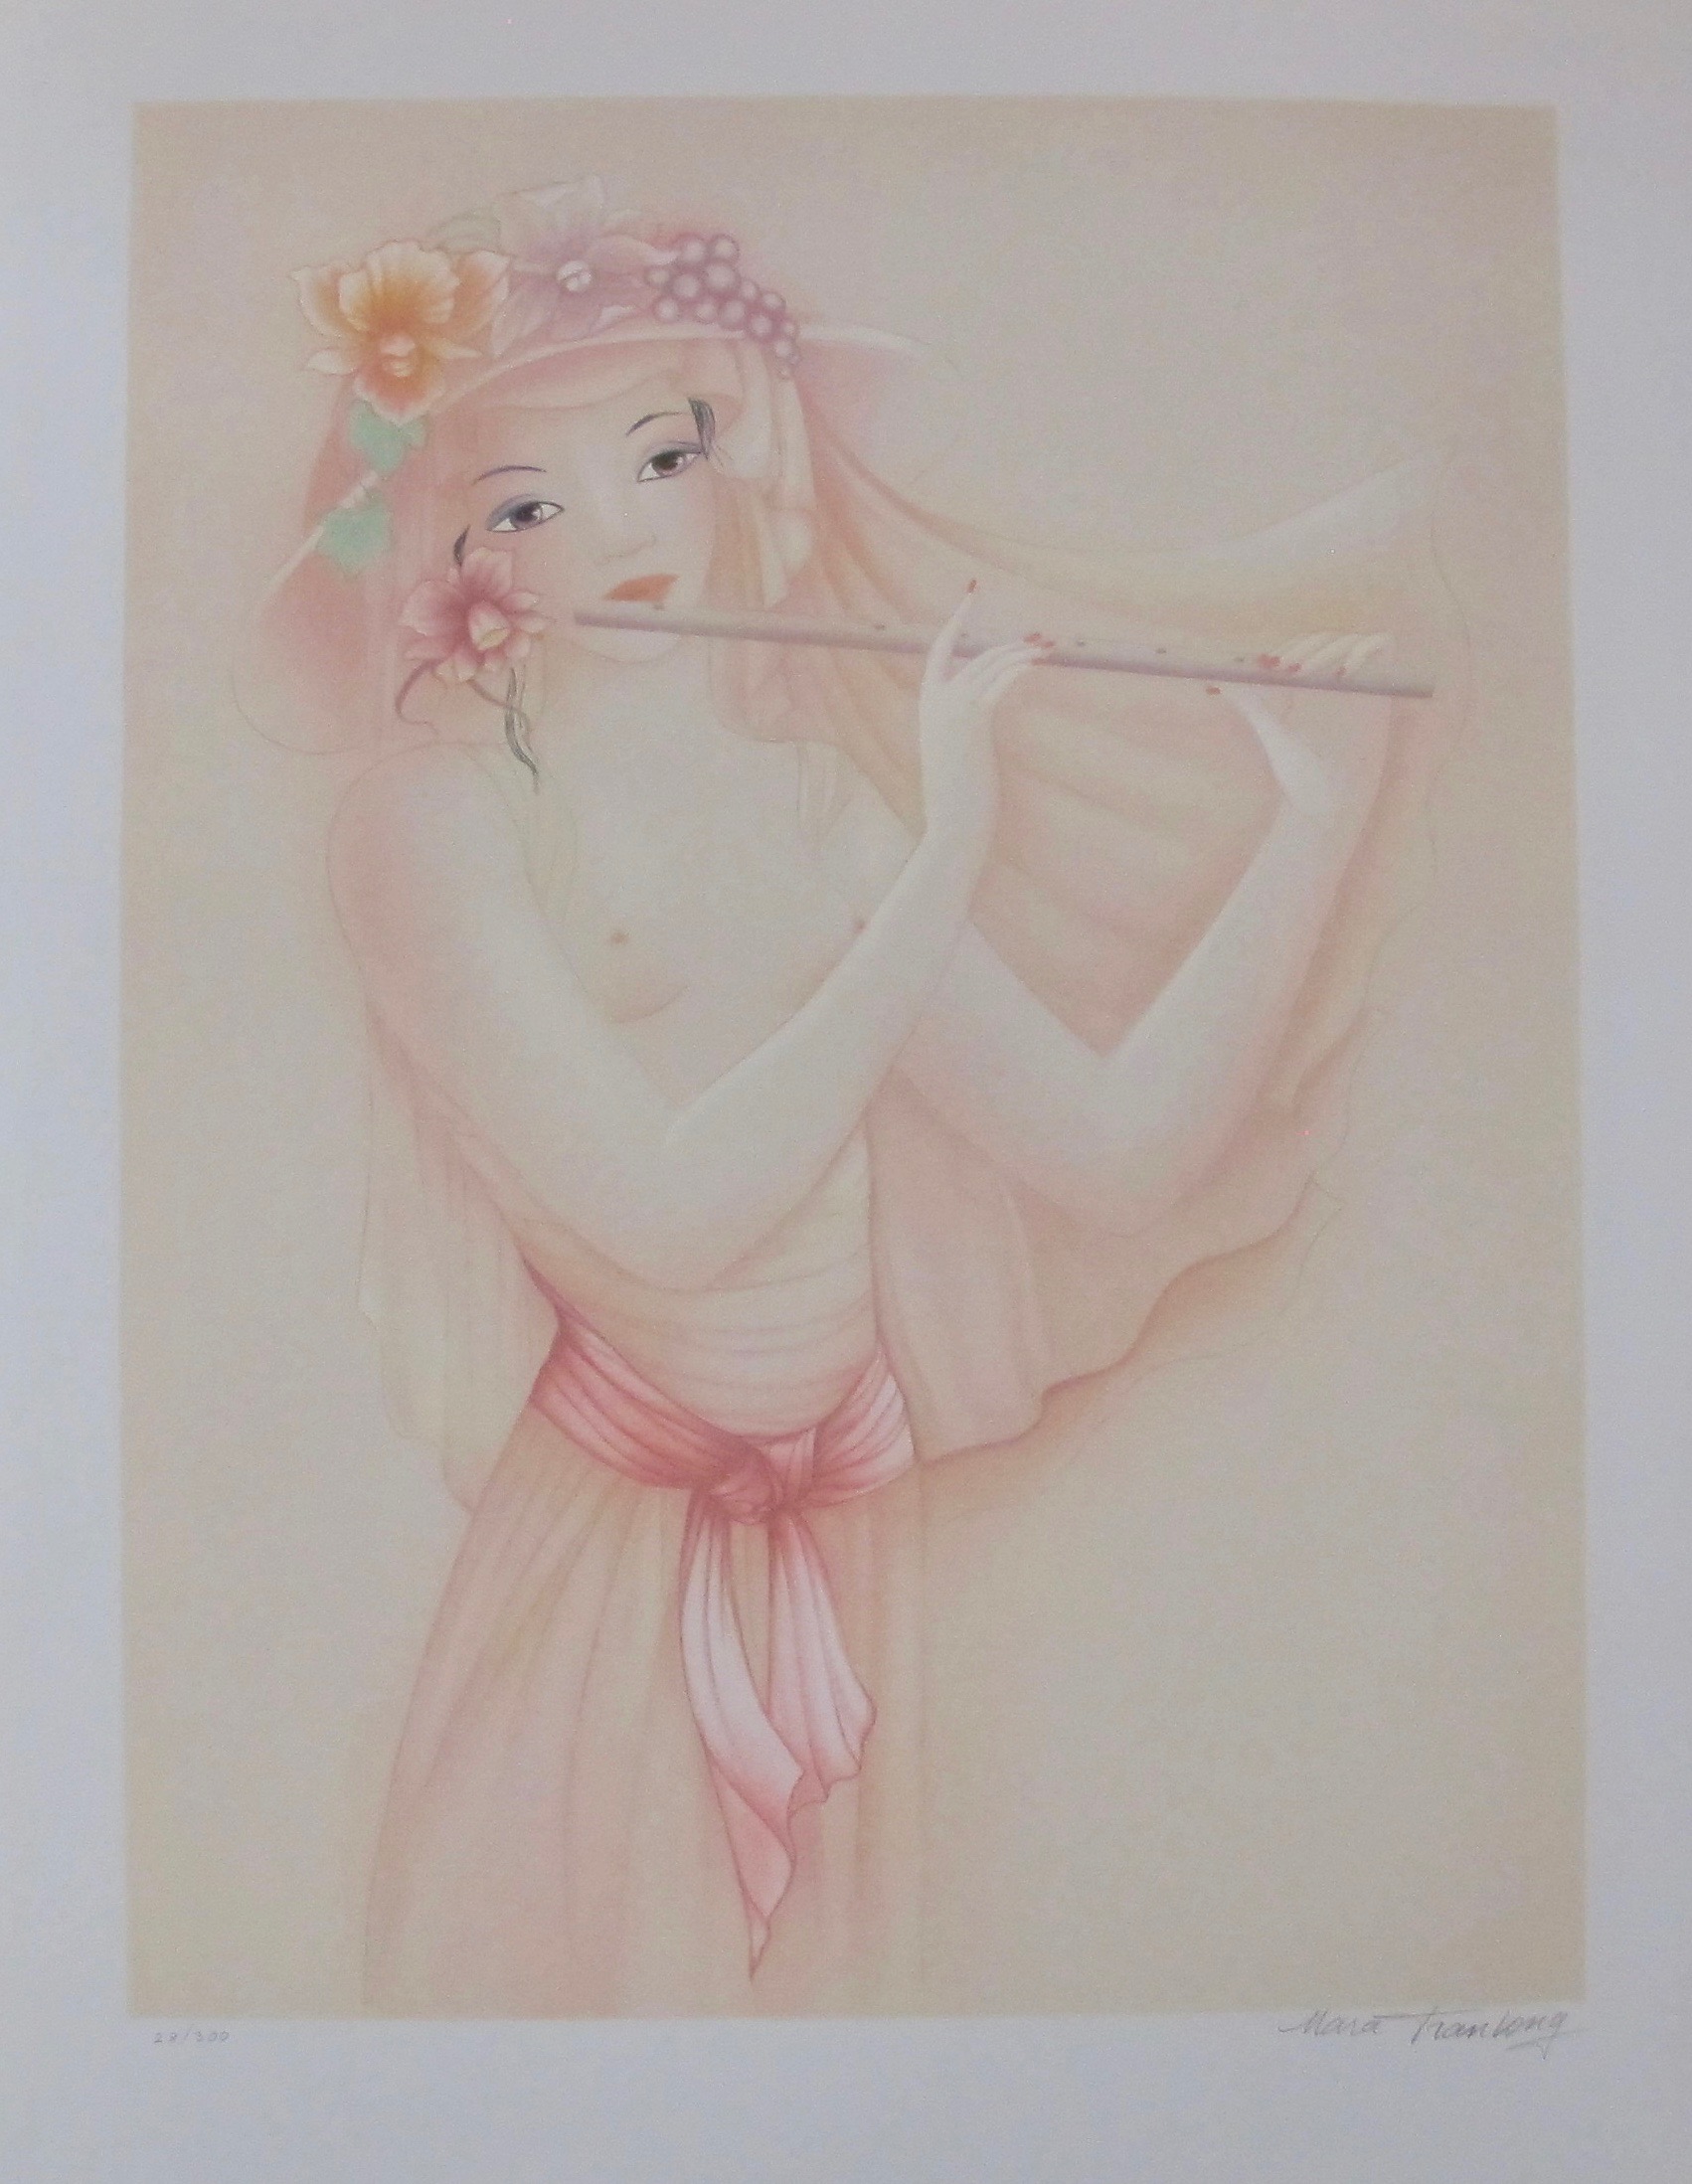 MARA TRANLONG 1975 Hand Signed Limited Edition Lithograph FLUTE PLAYER